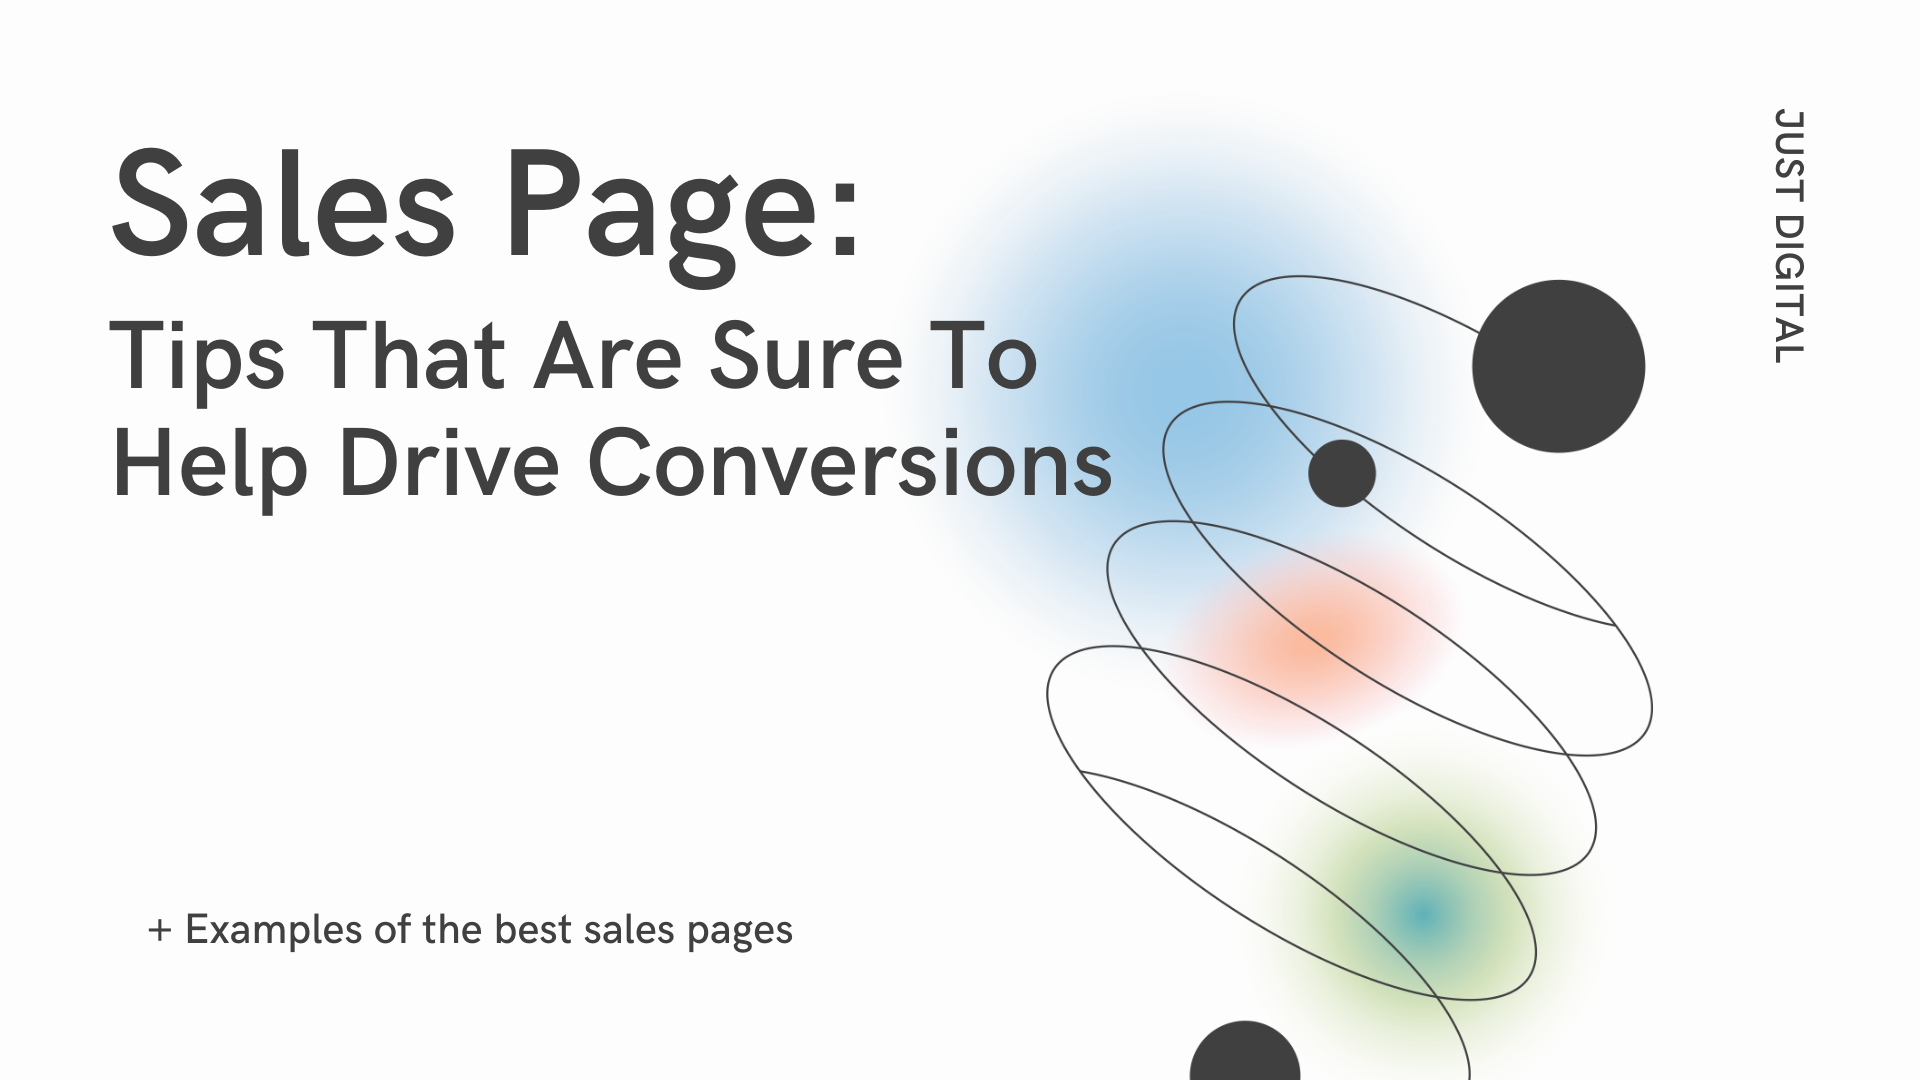 Sales Page Tips